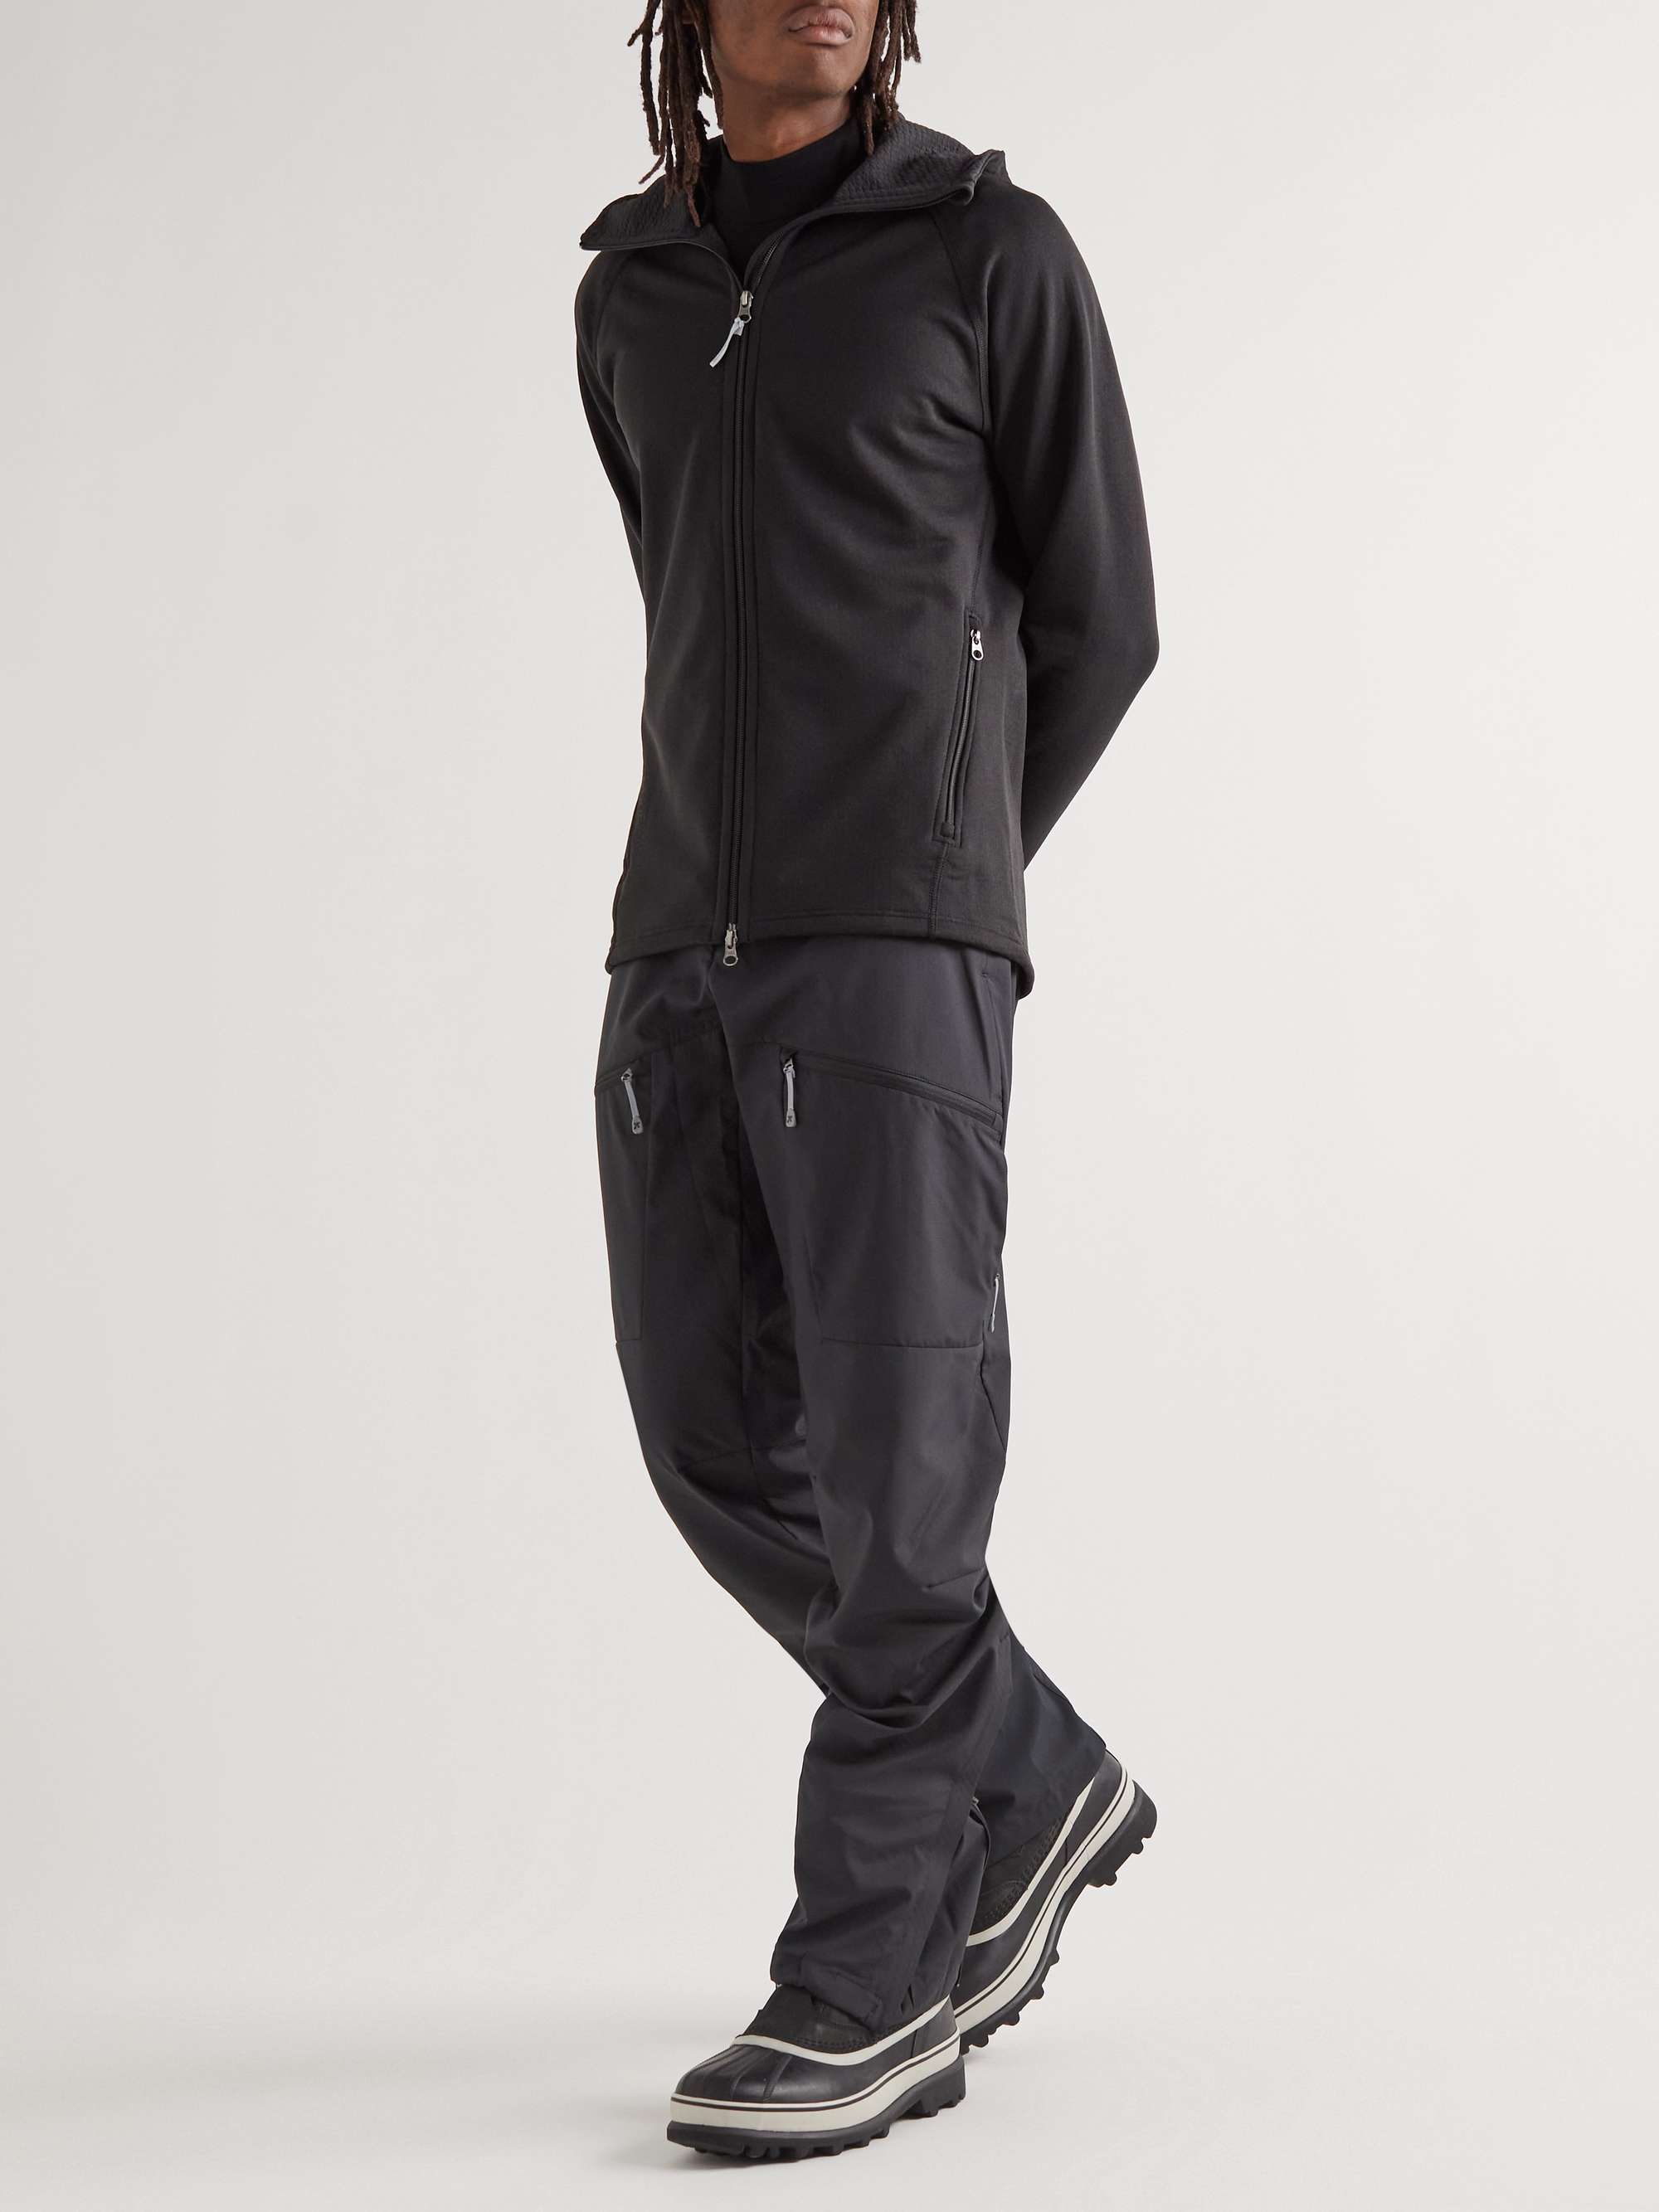 Pace Slim-Fit Recycled Ski Pants